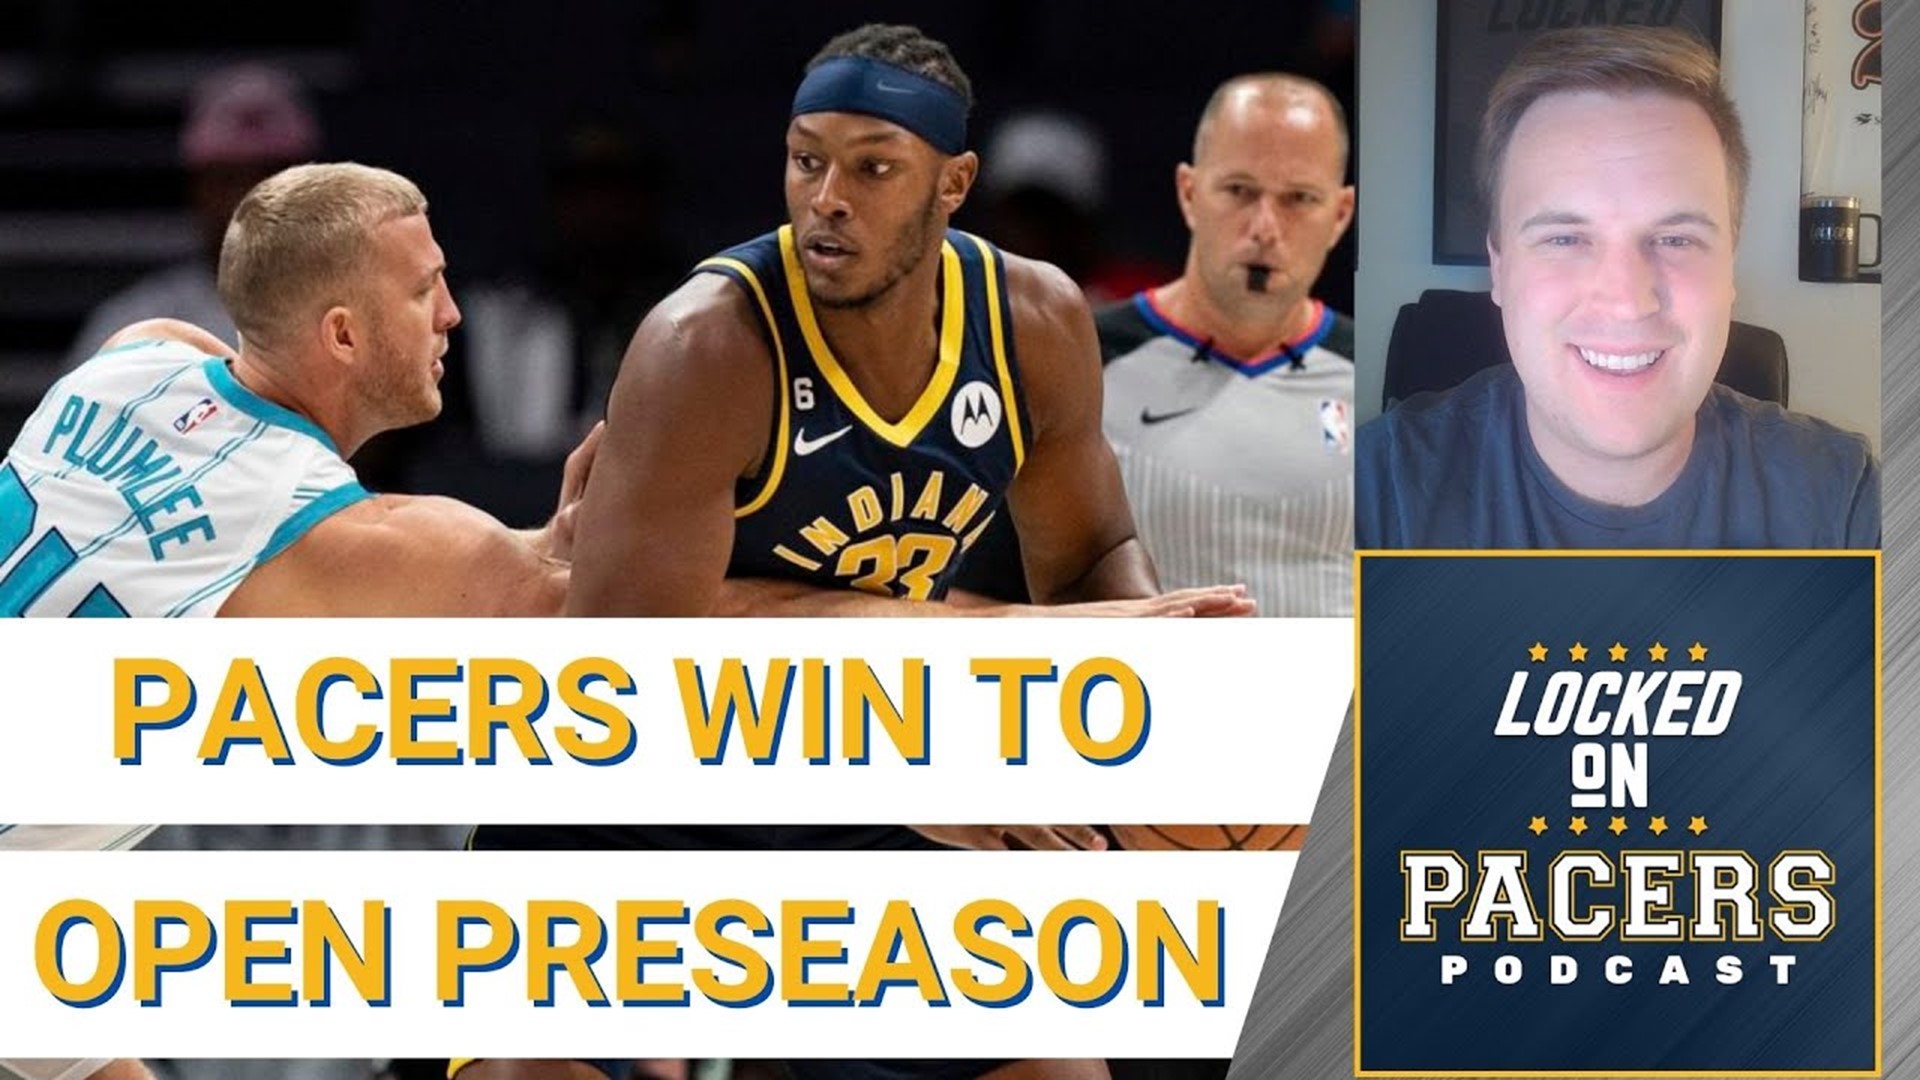 Pacers win opening preseason game behind Bennedict Mathurin, Aaron Nesmith, and impressive defense